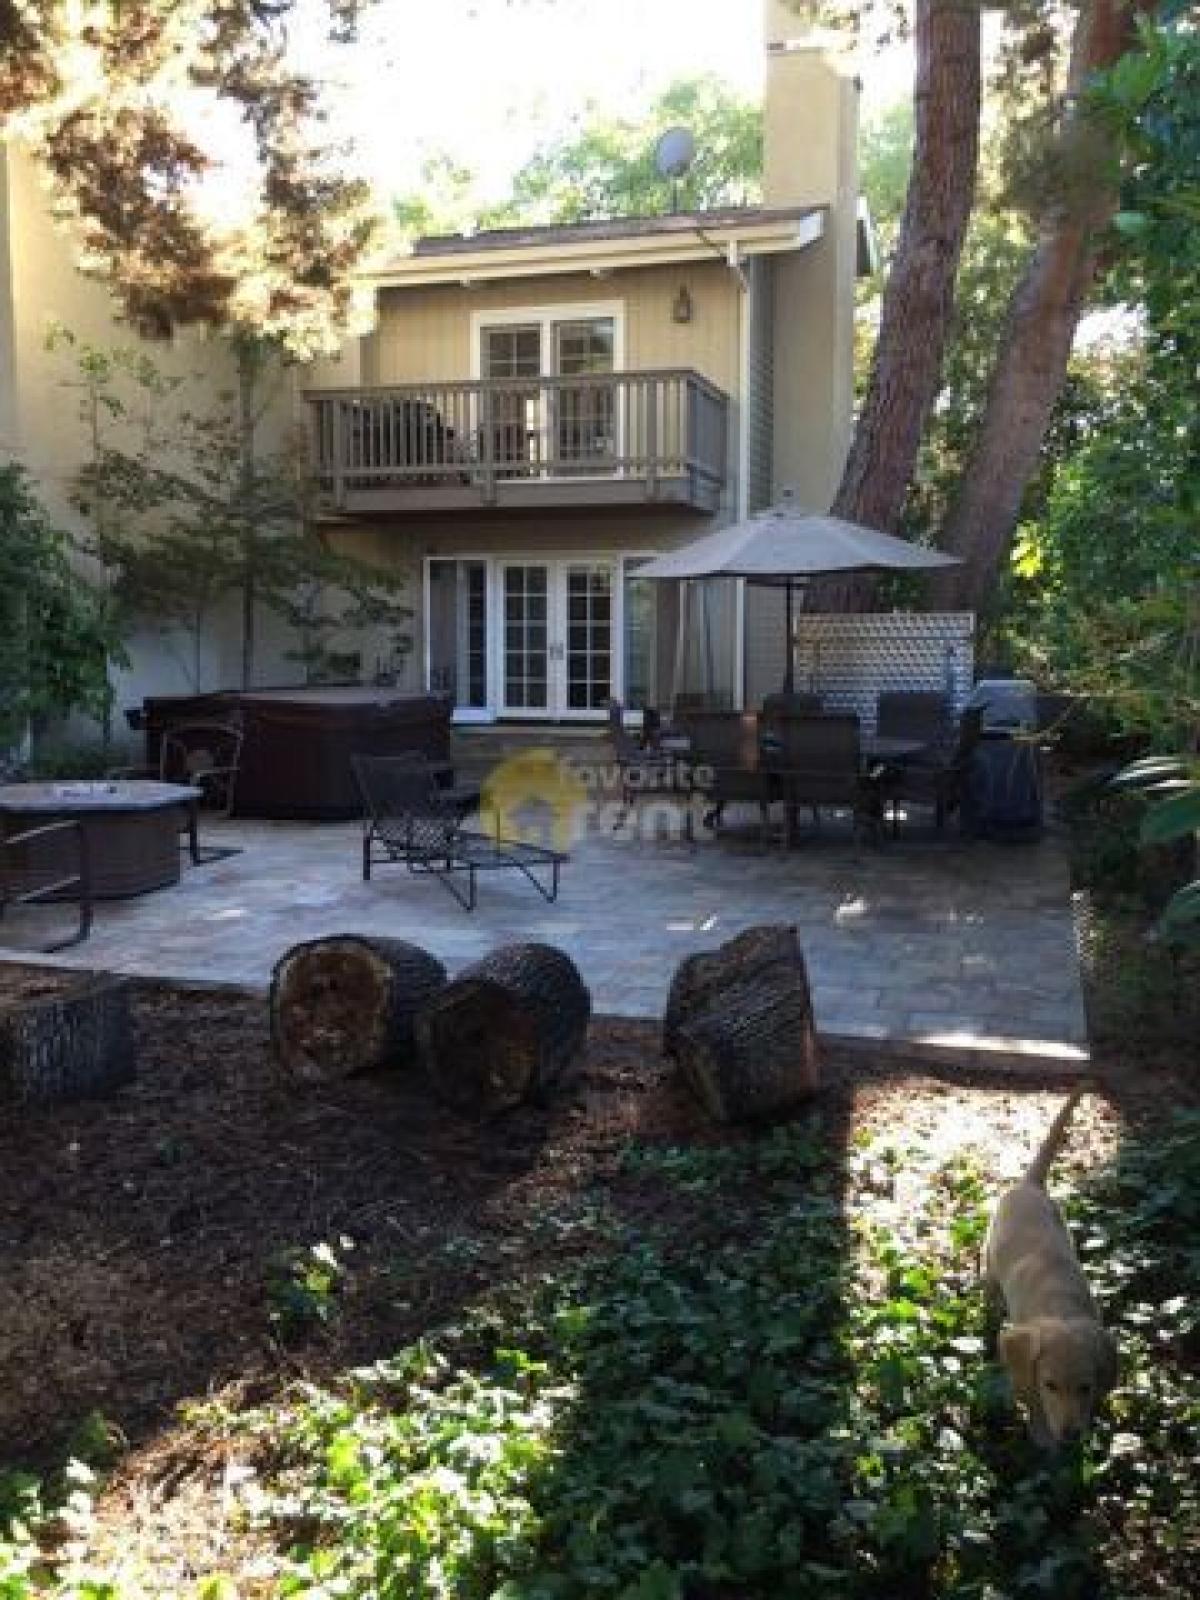 Picture of Home For Rent in Menlo Park, California, United States